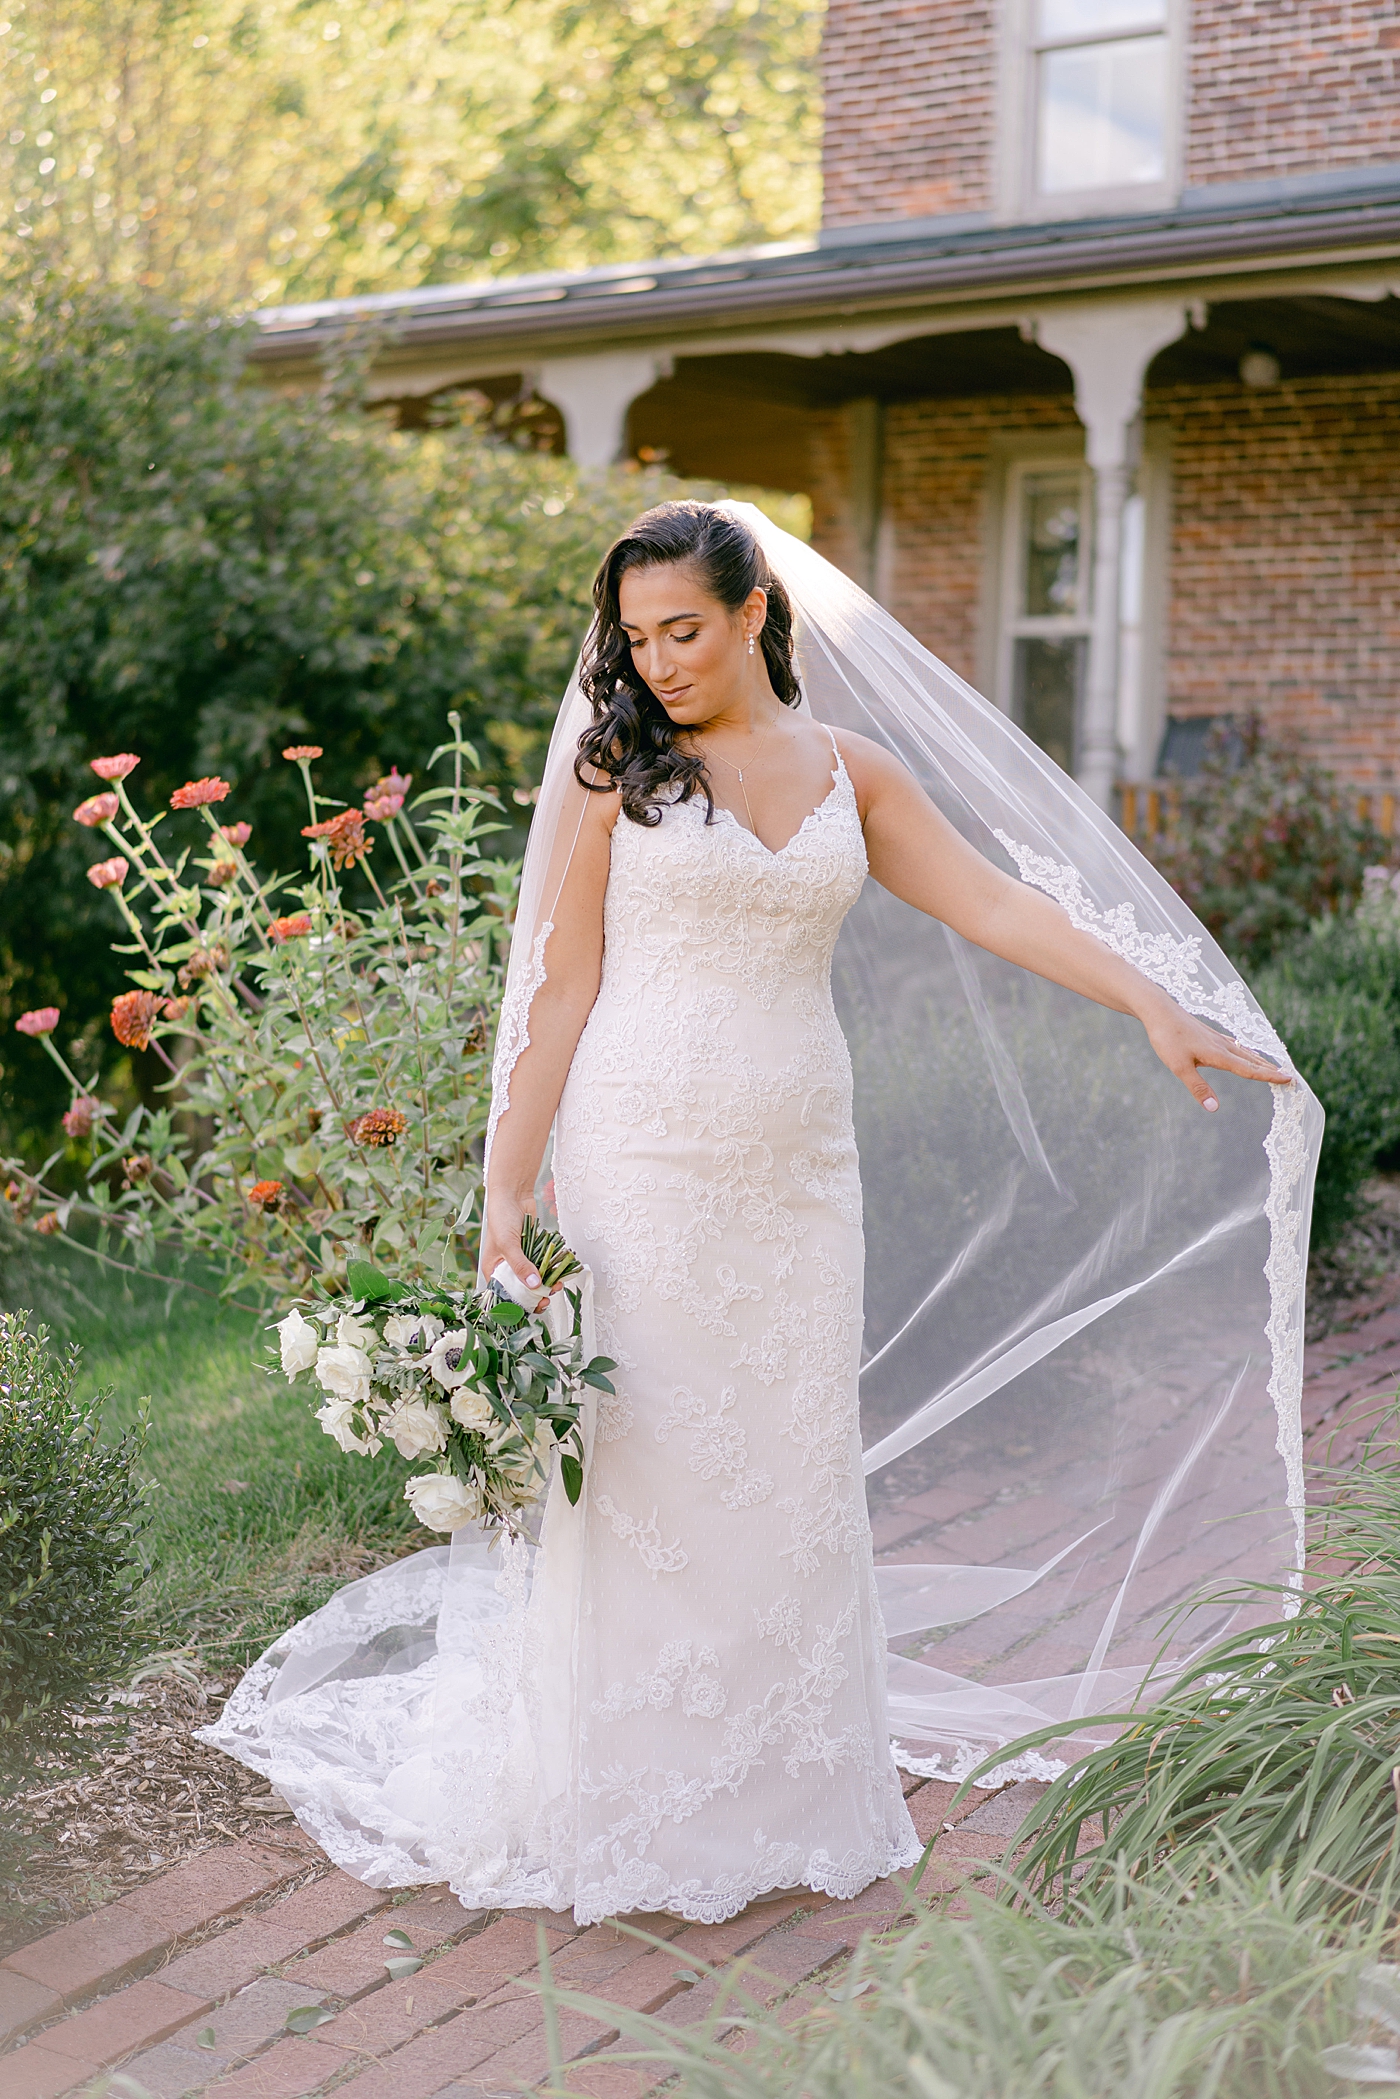 Bride holding her veil and bouquet | Photo by Hope Helmuth Photography